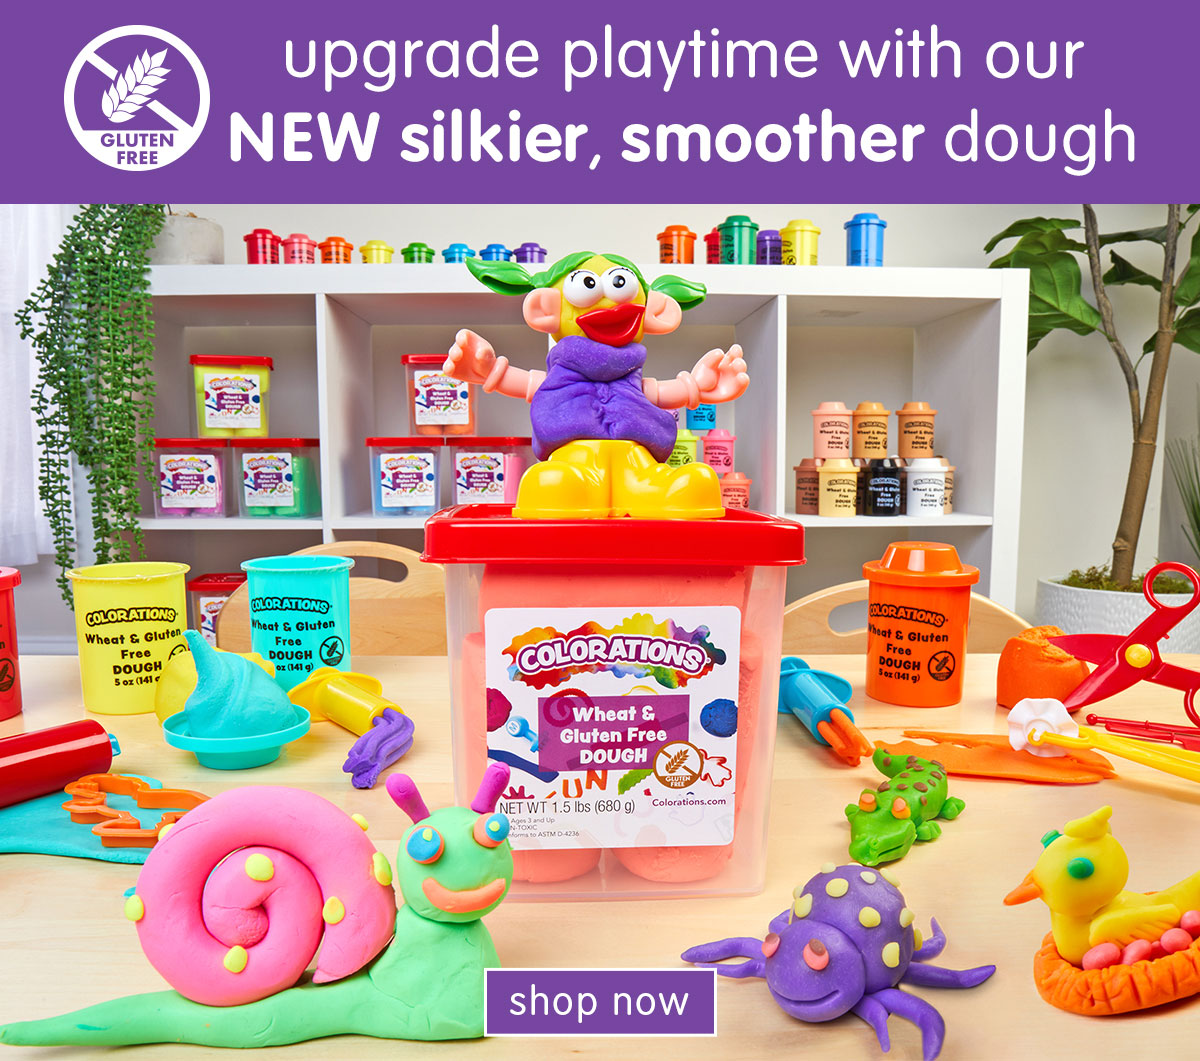 Upgrade playtime with our new silkier, smoother dough